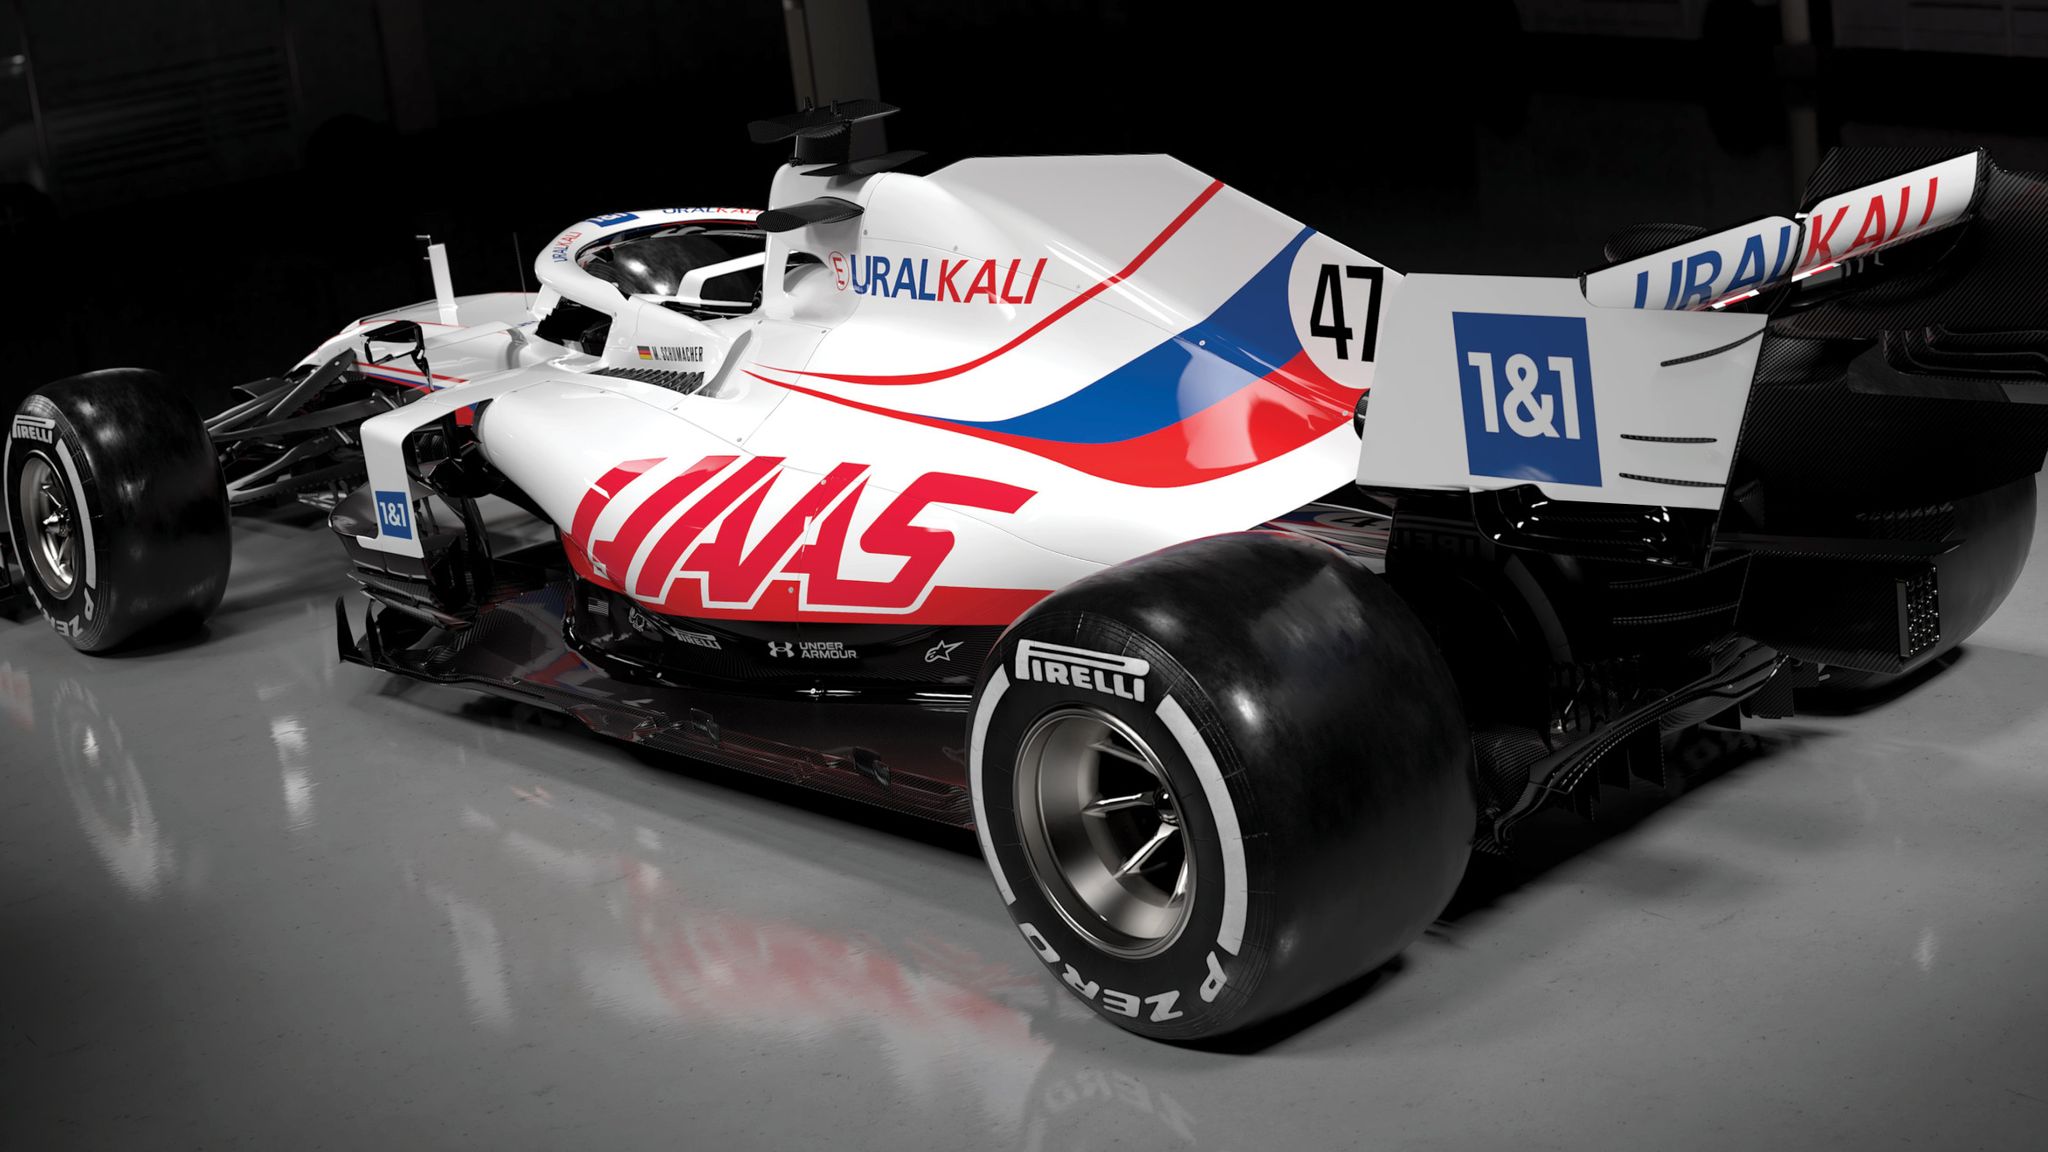 Haas Unveil New Look Livery For 21 Formula 1 Season For All Rookie Mick Schumacher Nikita Mazepin Line Up F1 News